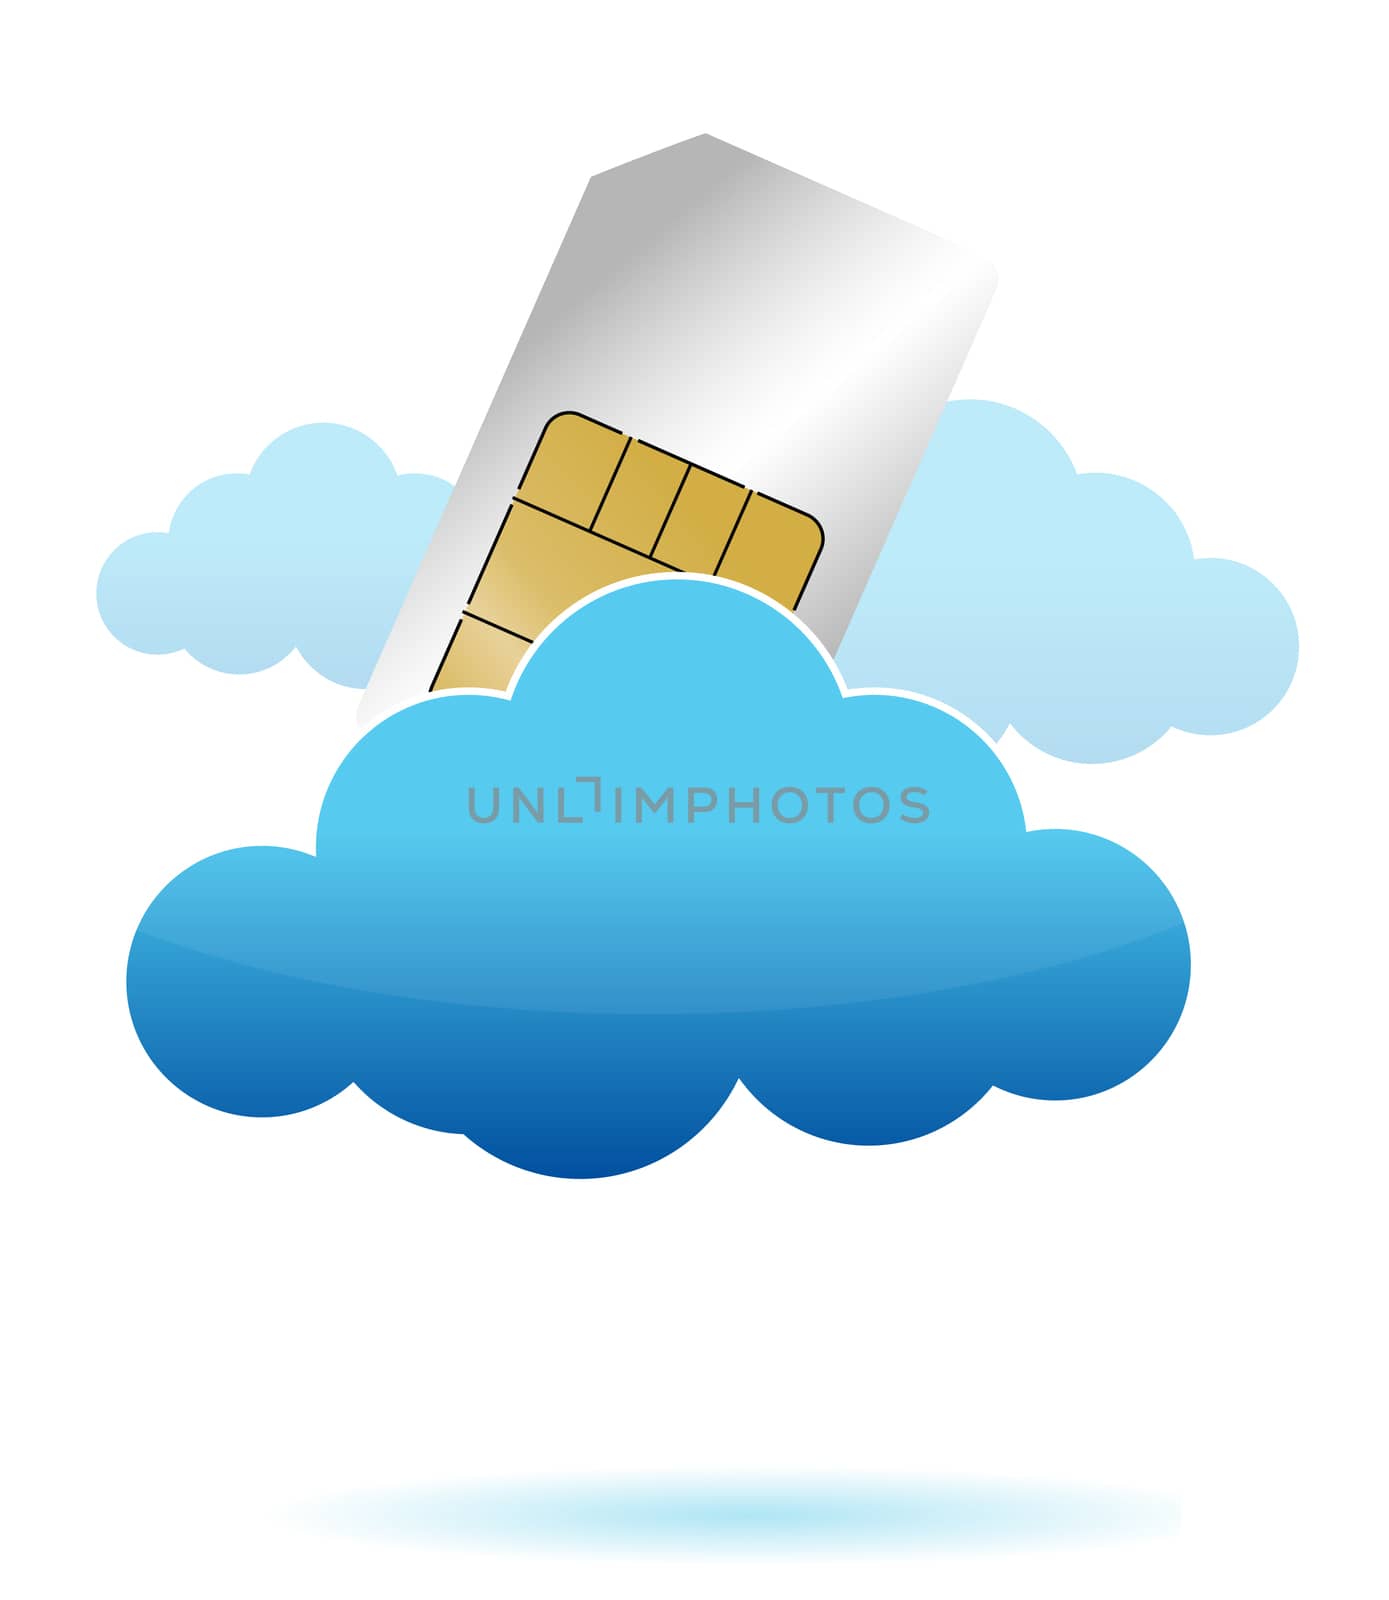 SIM card in the cloud illustration design by alexmillos